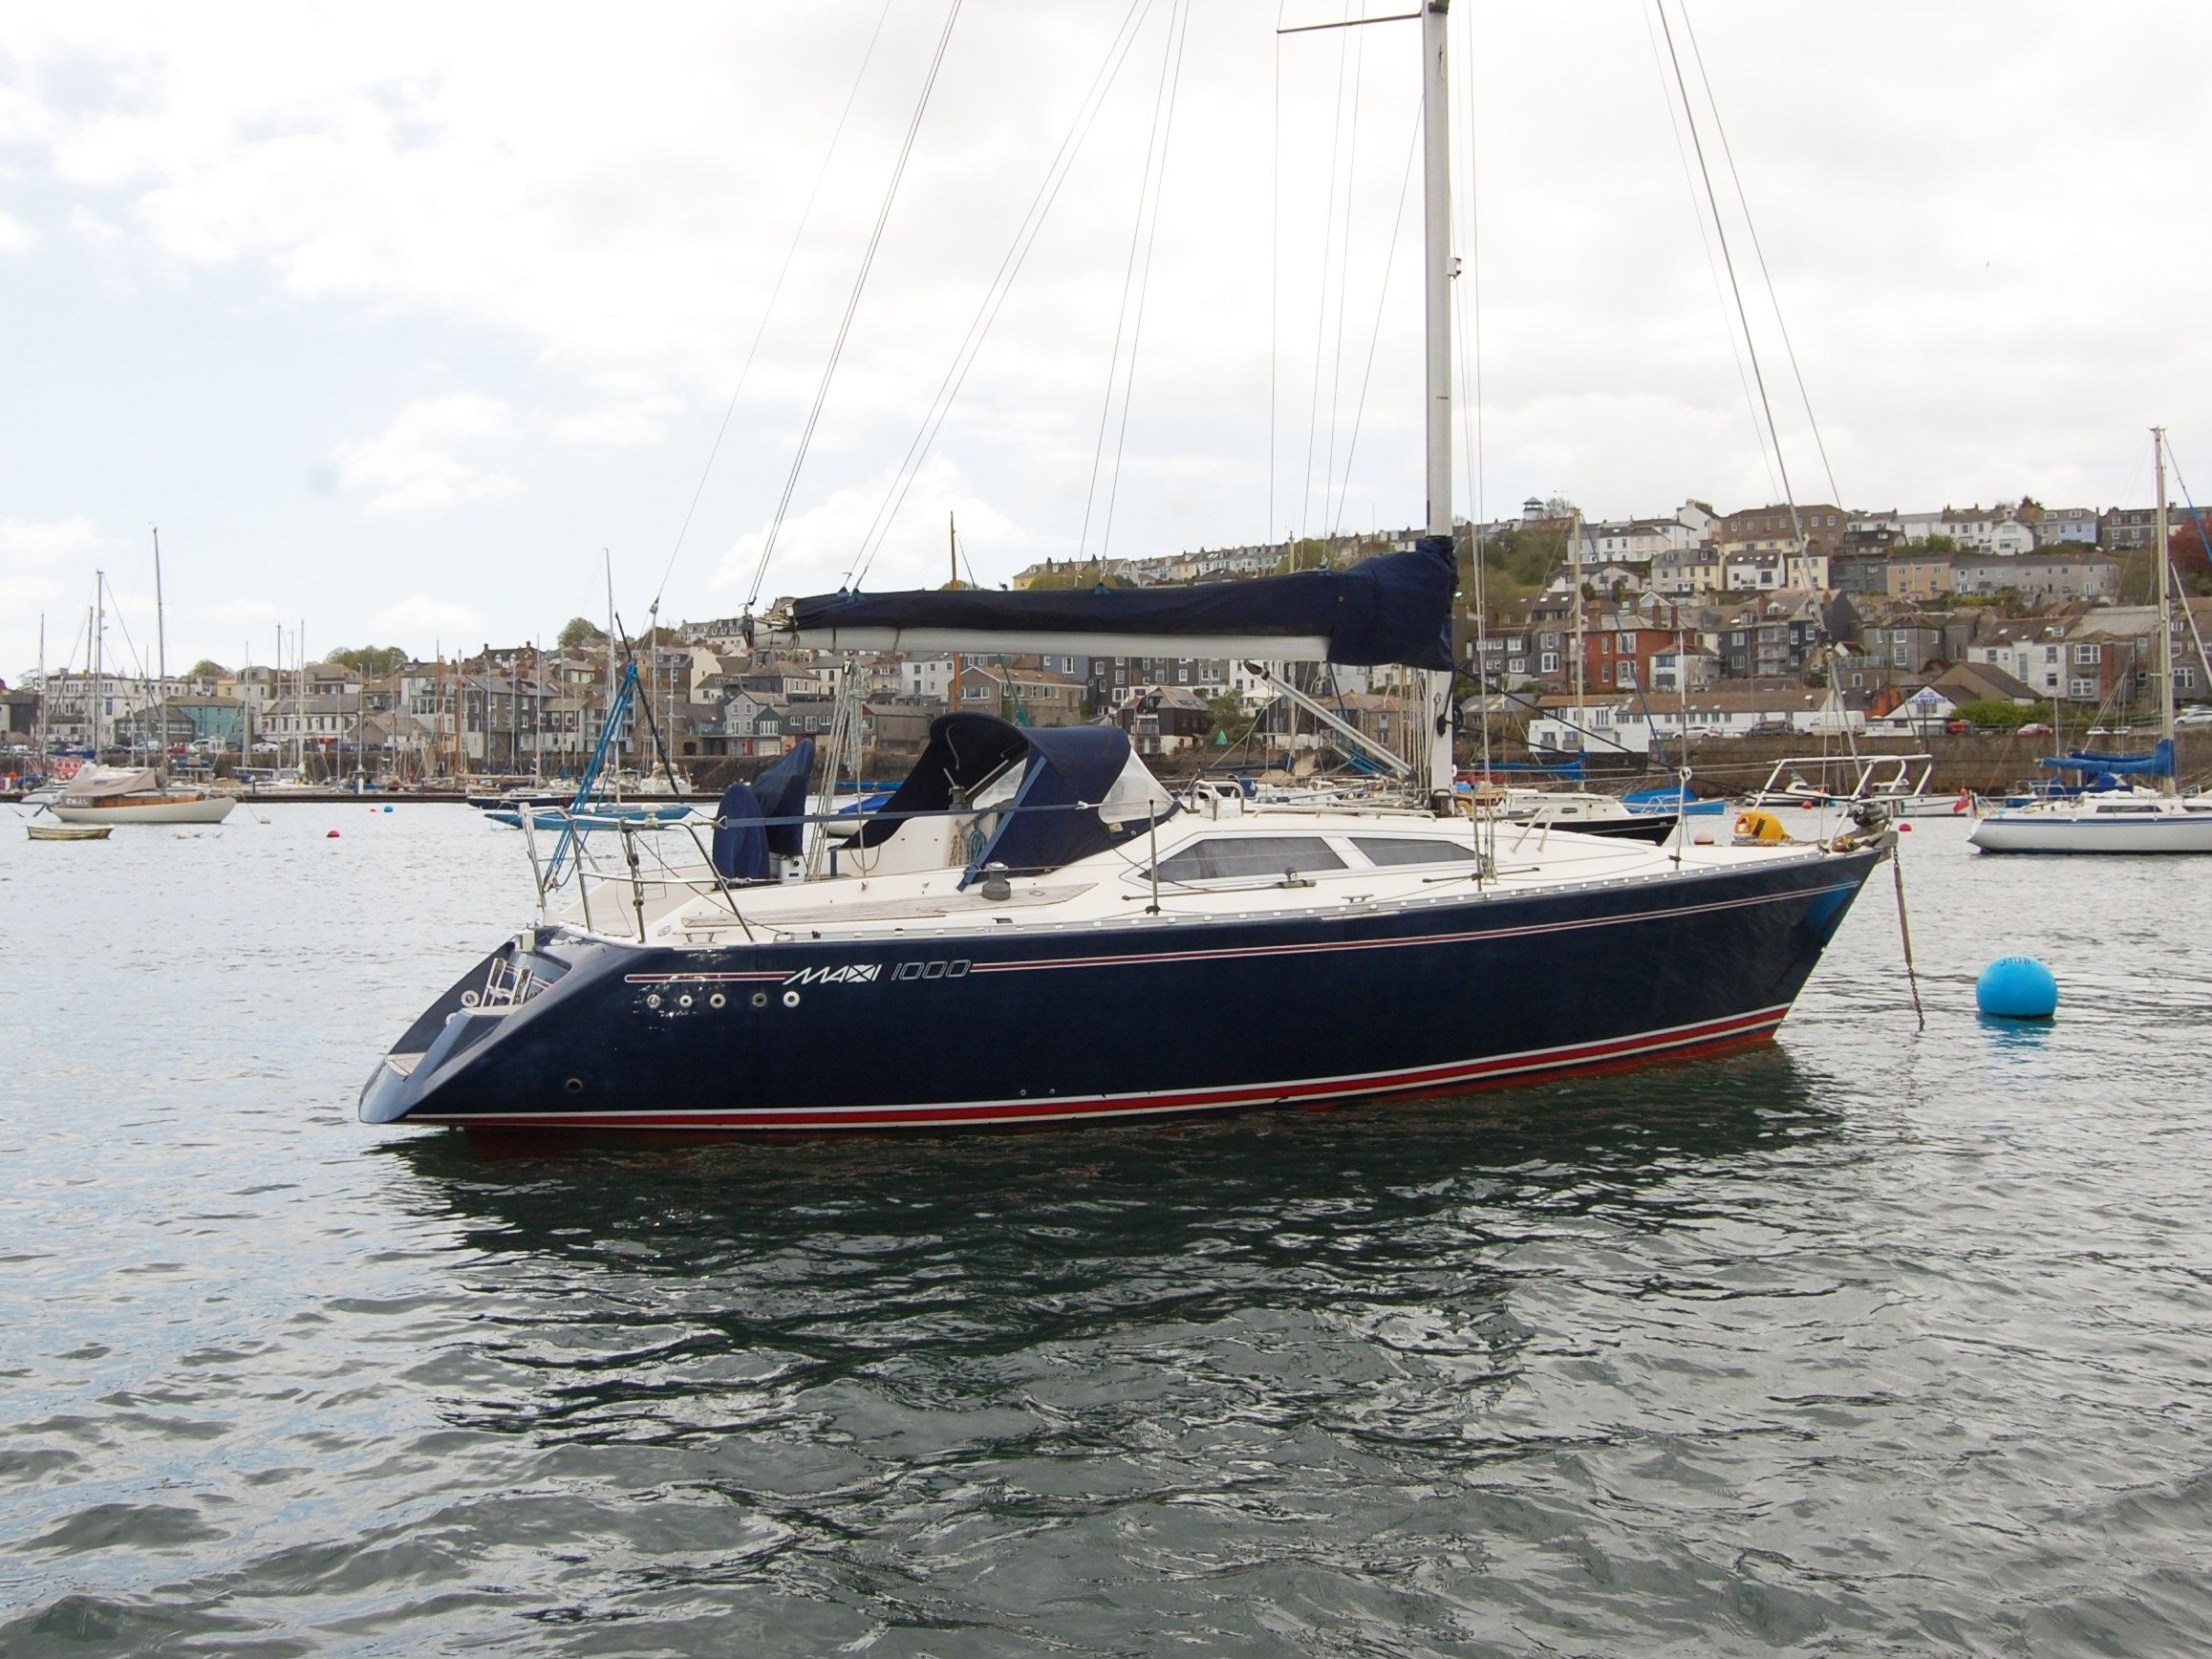 1999 Maxi 1000 Sail New and Used Boats for Sale - www.yachtworld.co.uk